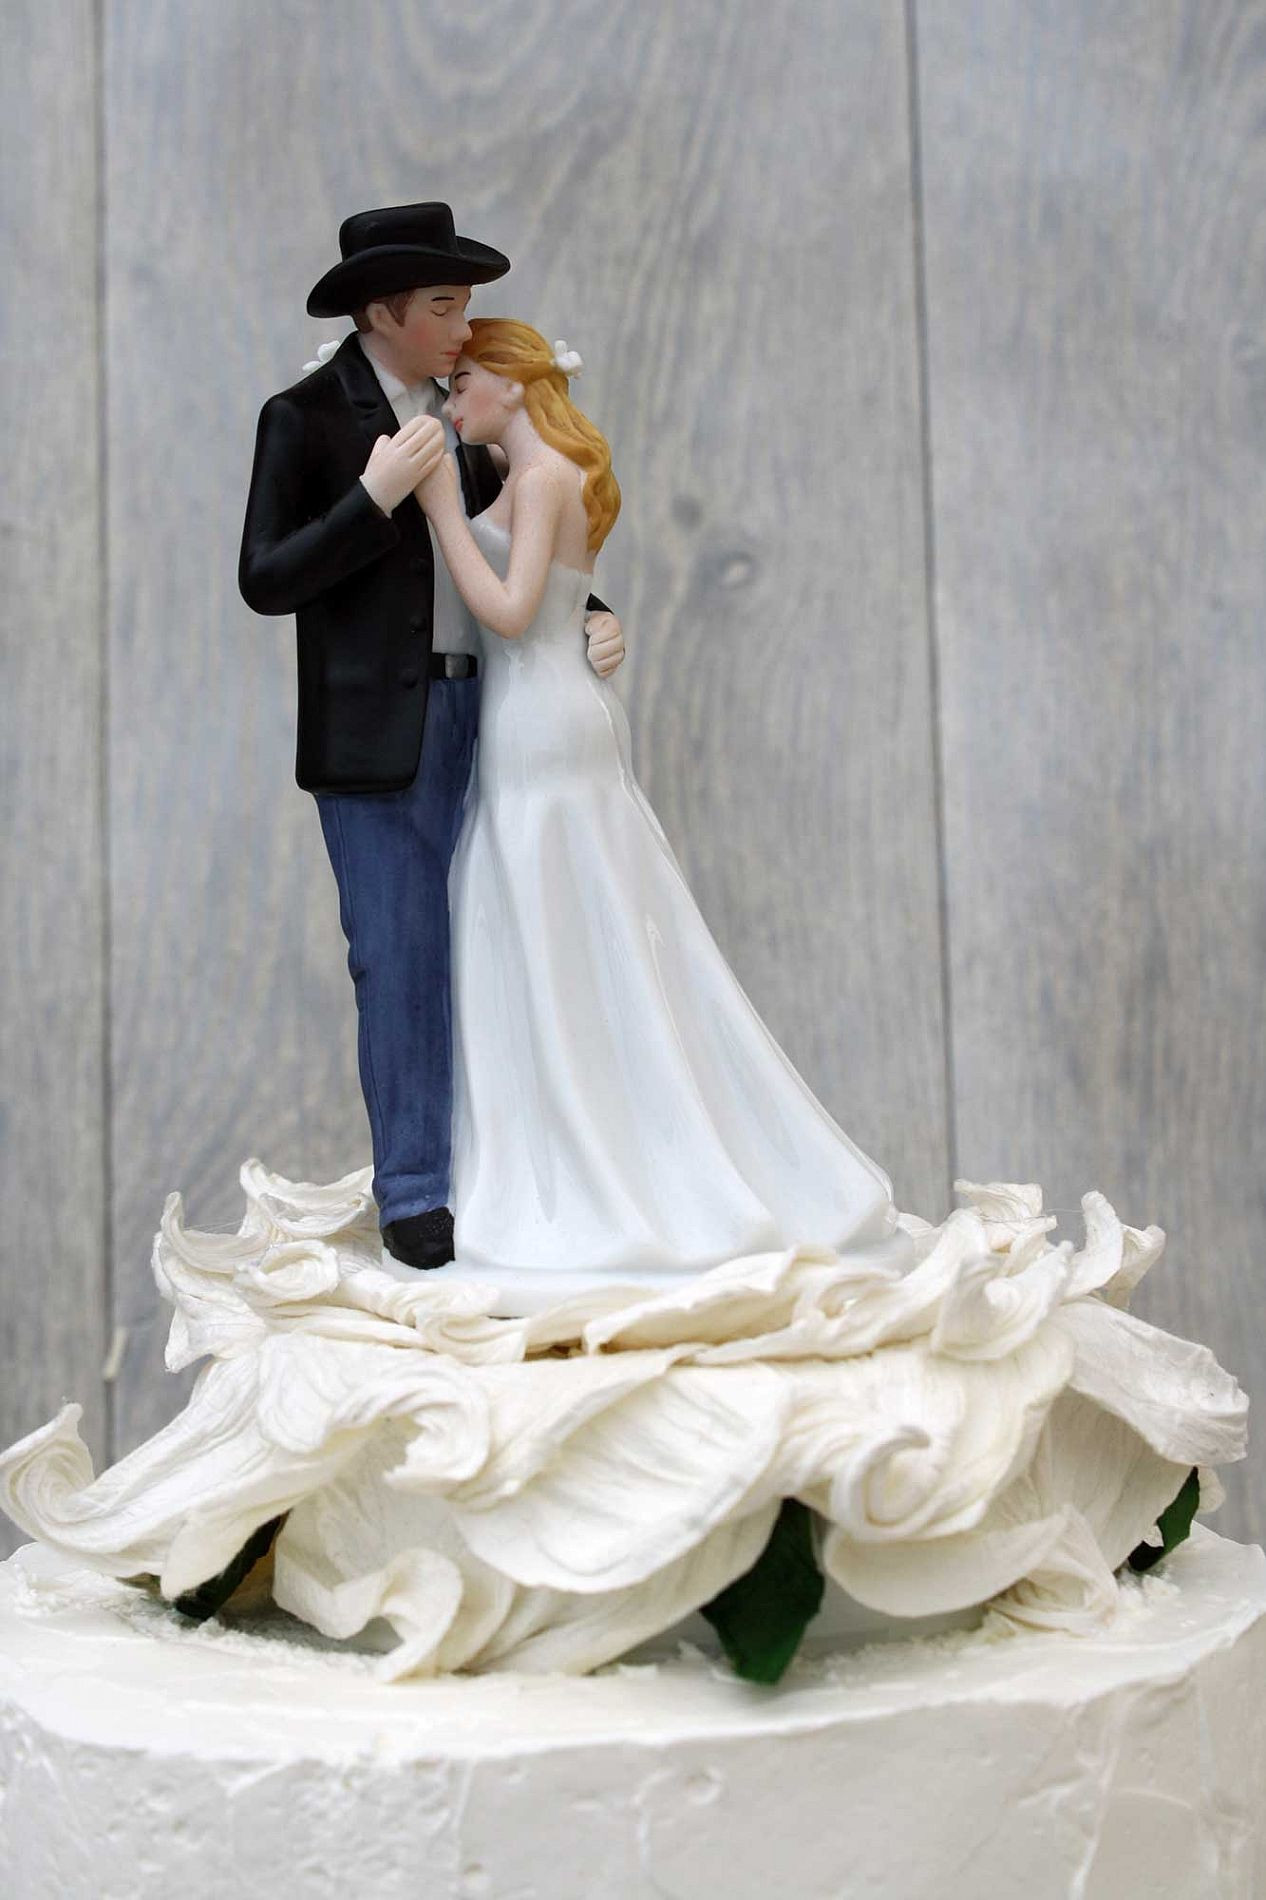 Wedding Cakes Tops
 ¨Lasso of Love¨ Rose BlossomWestern Wedding Cake Topper